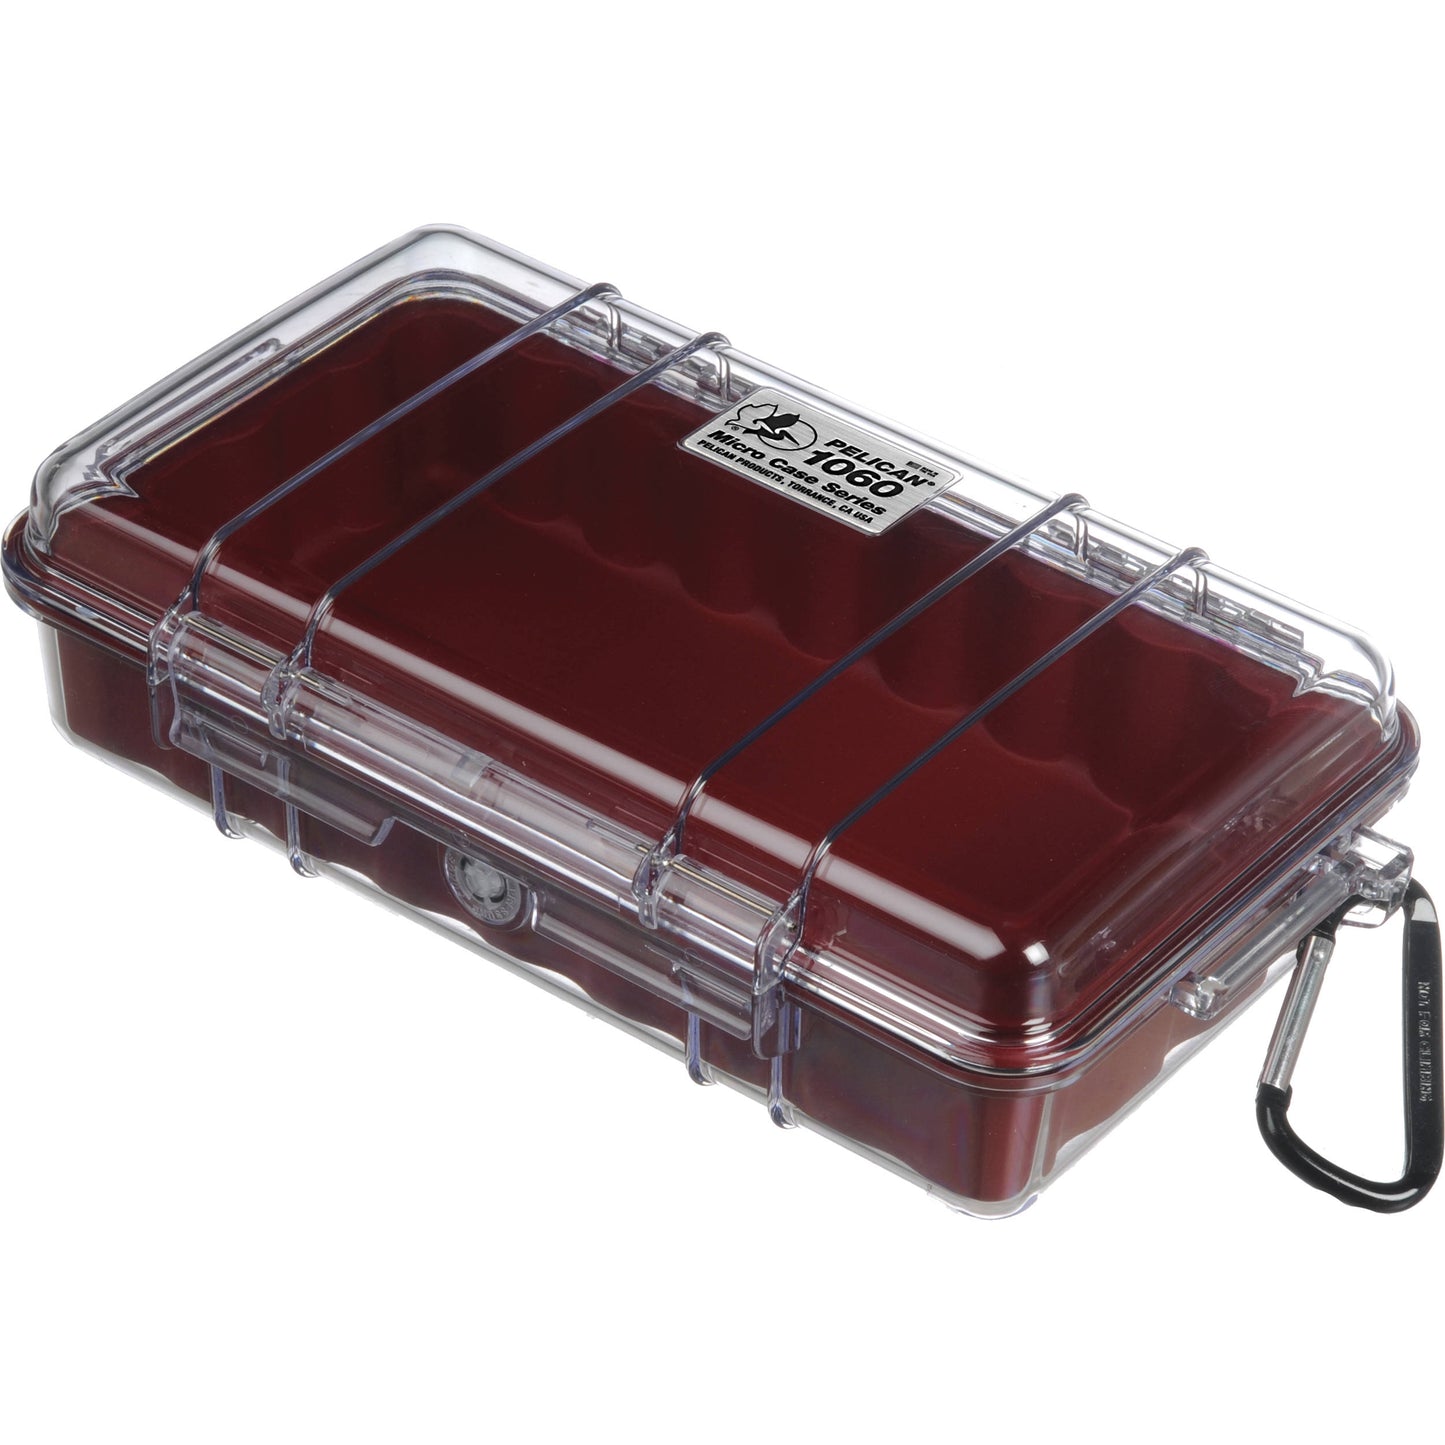 Pelican Micro Case (Colored Liner with Clear Cover) IP67 Watertight Hard Casing with Automatic Pressure Purge Valve for Small Electronics | Model 1060